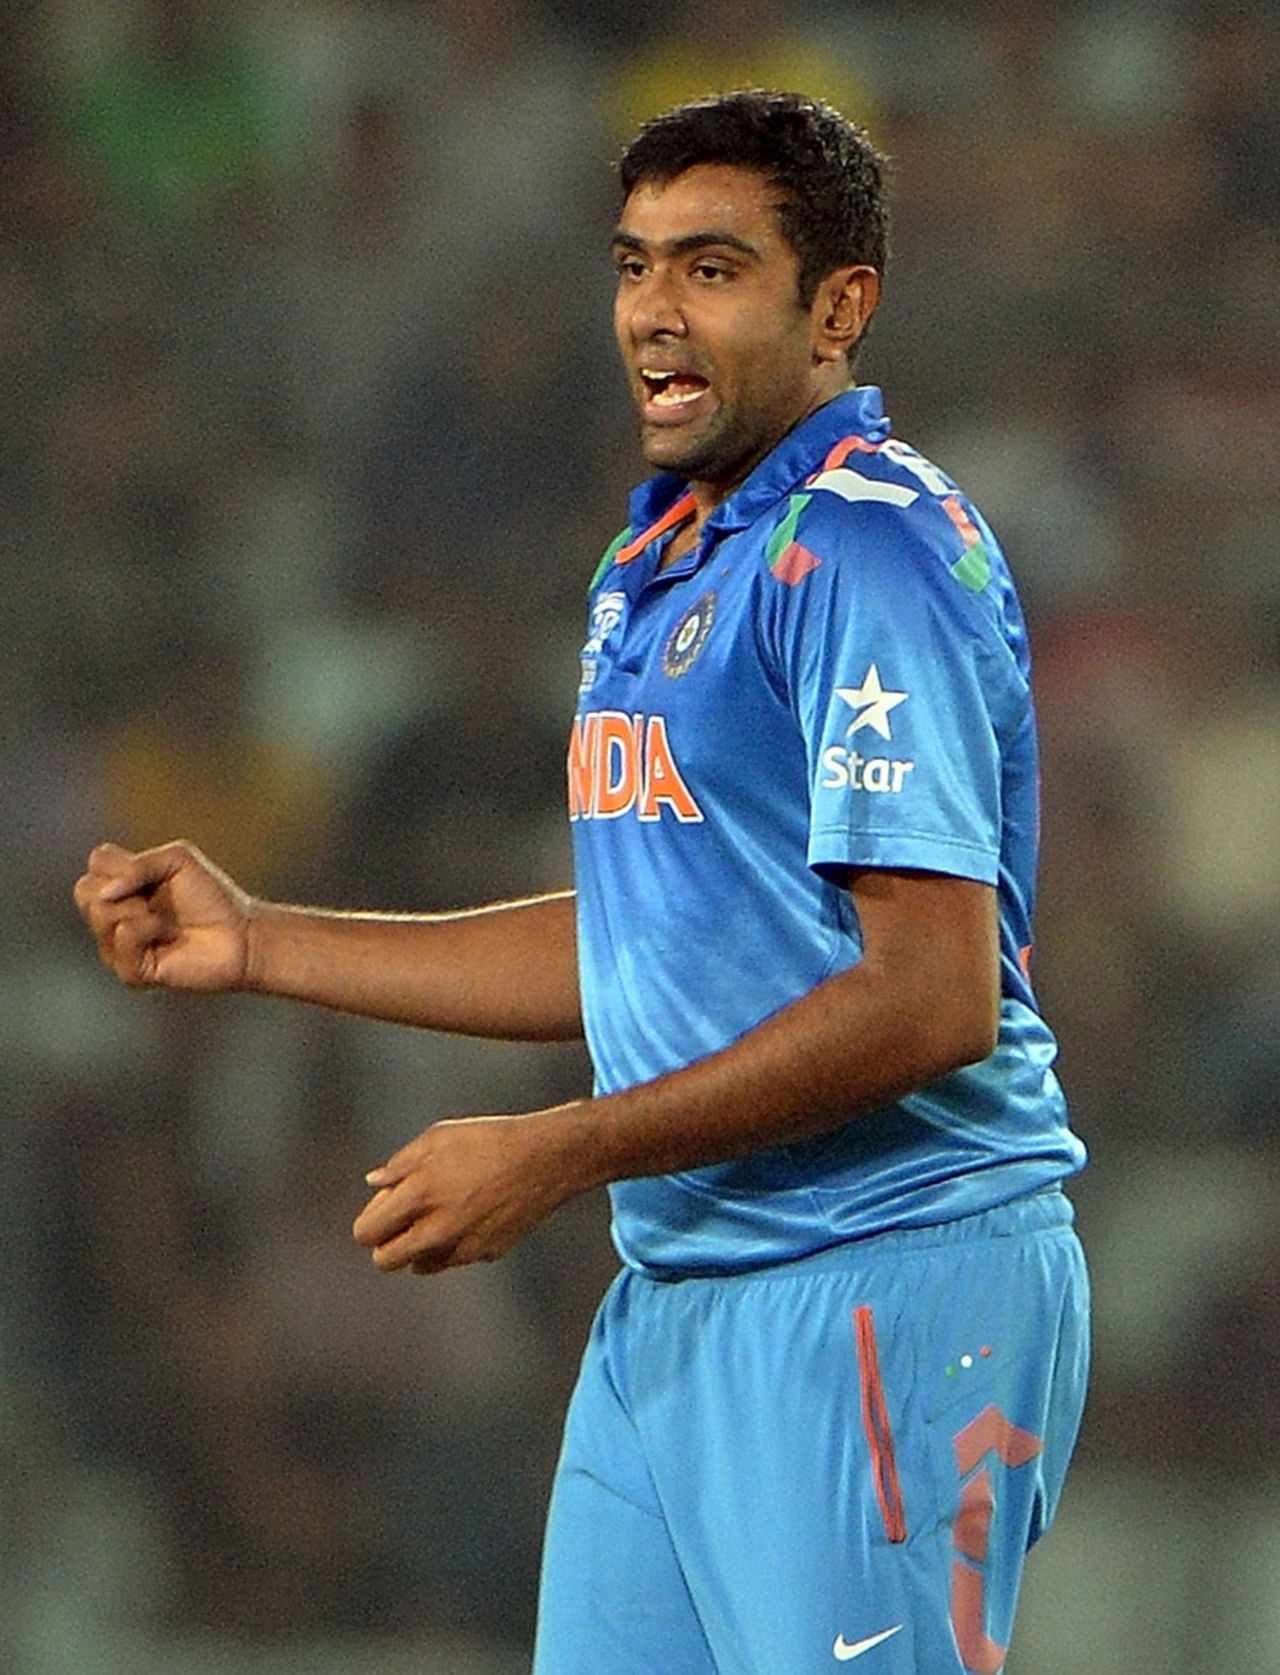 R Ashwin's 4 for 11 was the best figures by an Indian in T20s, Australia v India, World T20, Group 2, Mirpur, March 30, 2014